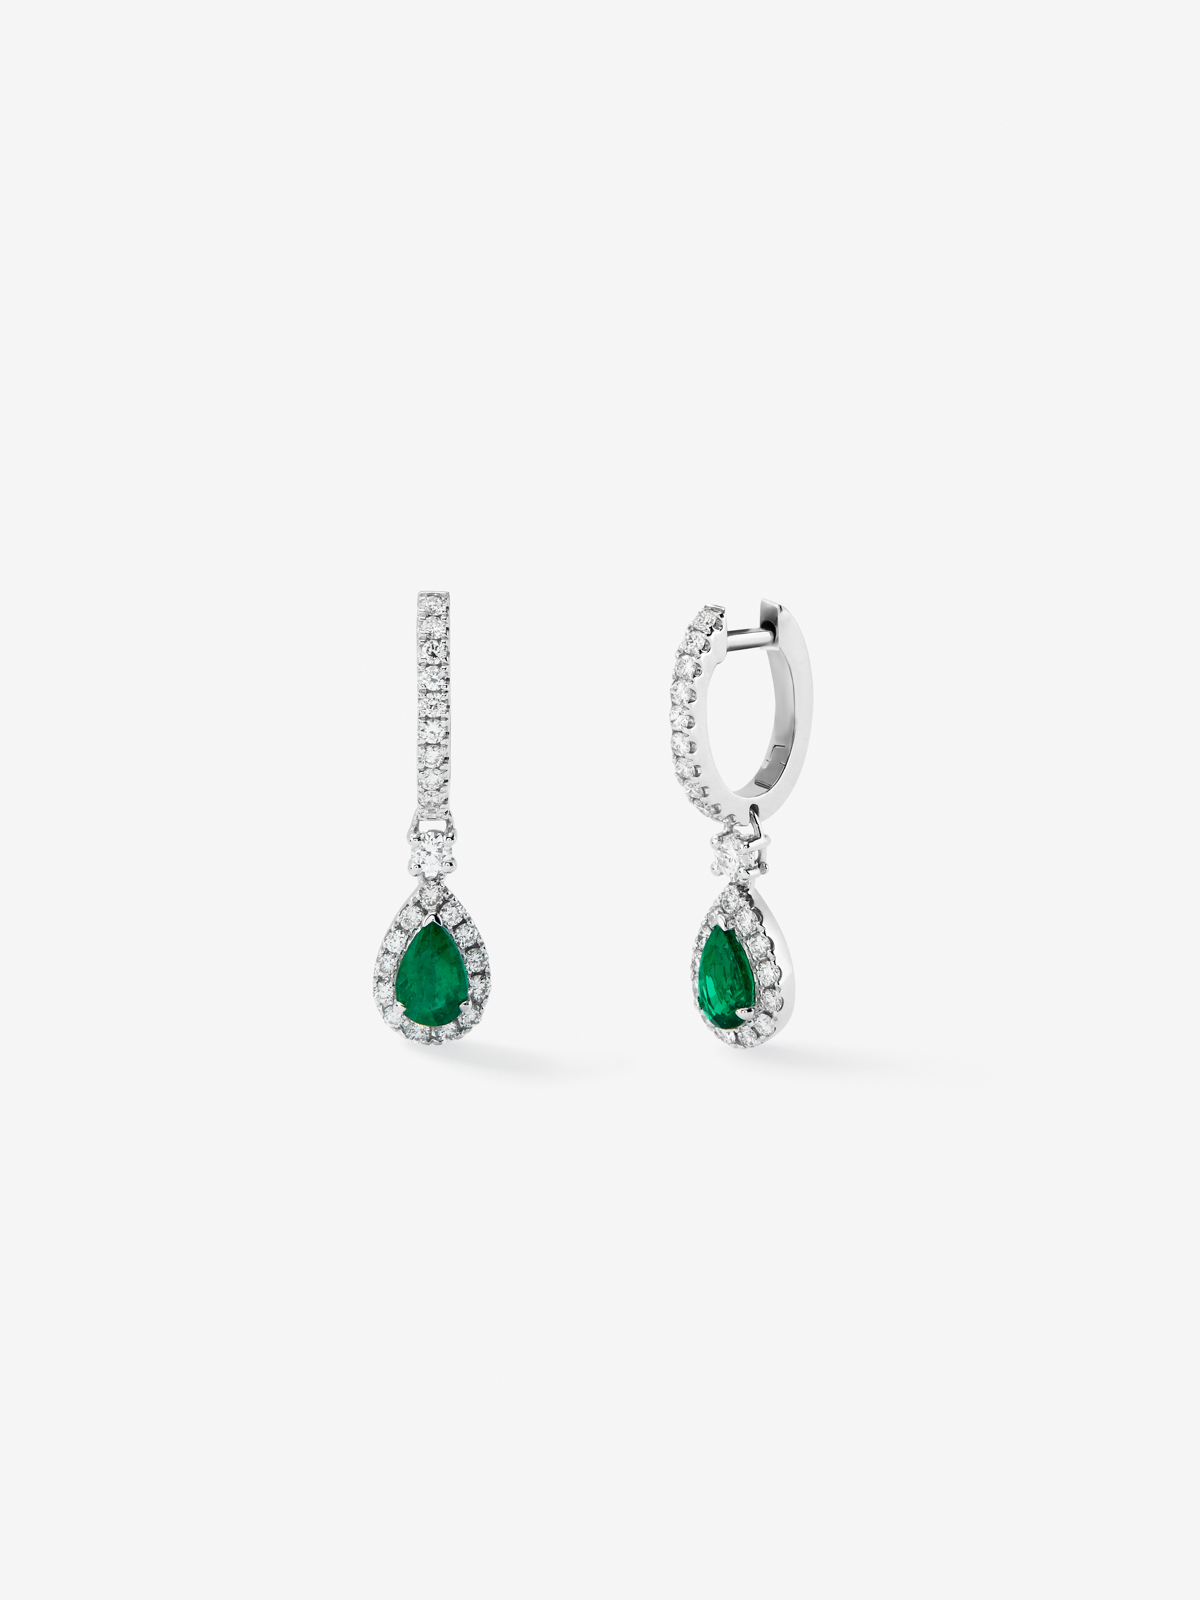 18K white gold earrings with green emeralds in 0.73 cts and white diamonds in bright 0.54 cts